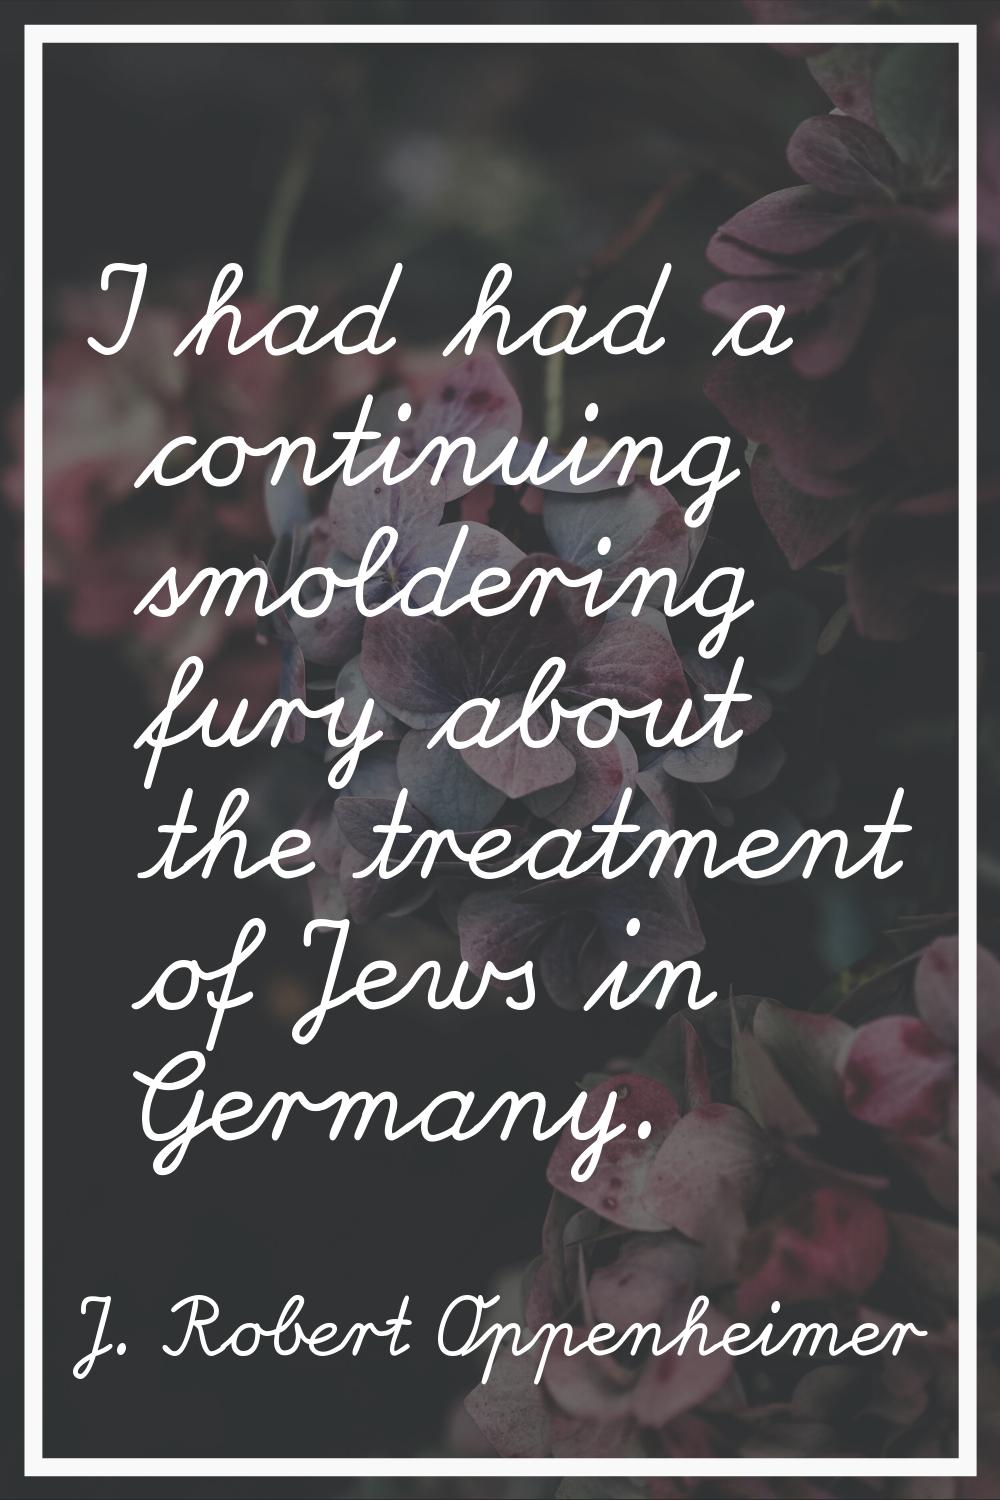 I had had a continuing smoldering fury about the treatment of Jews in Germany.